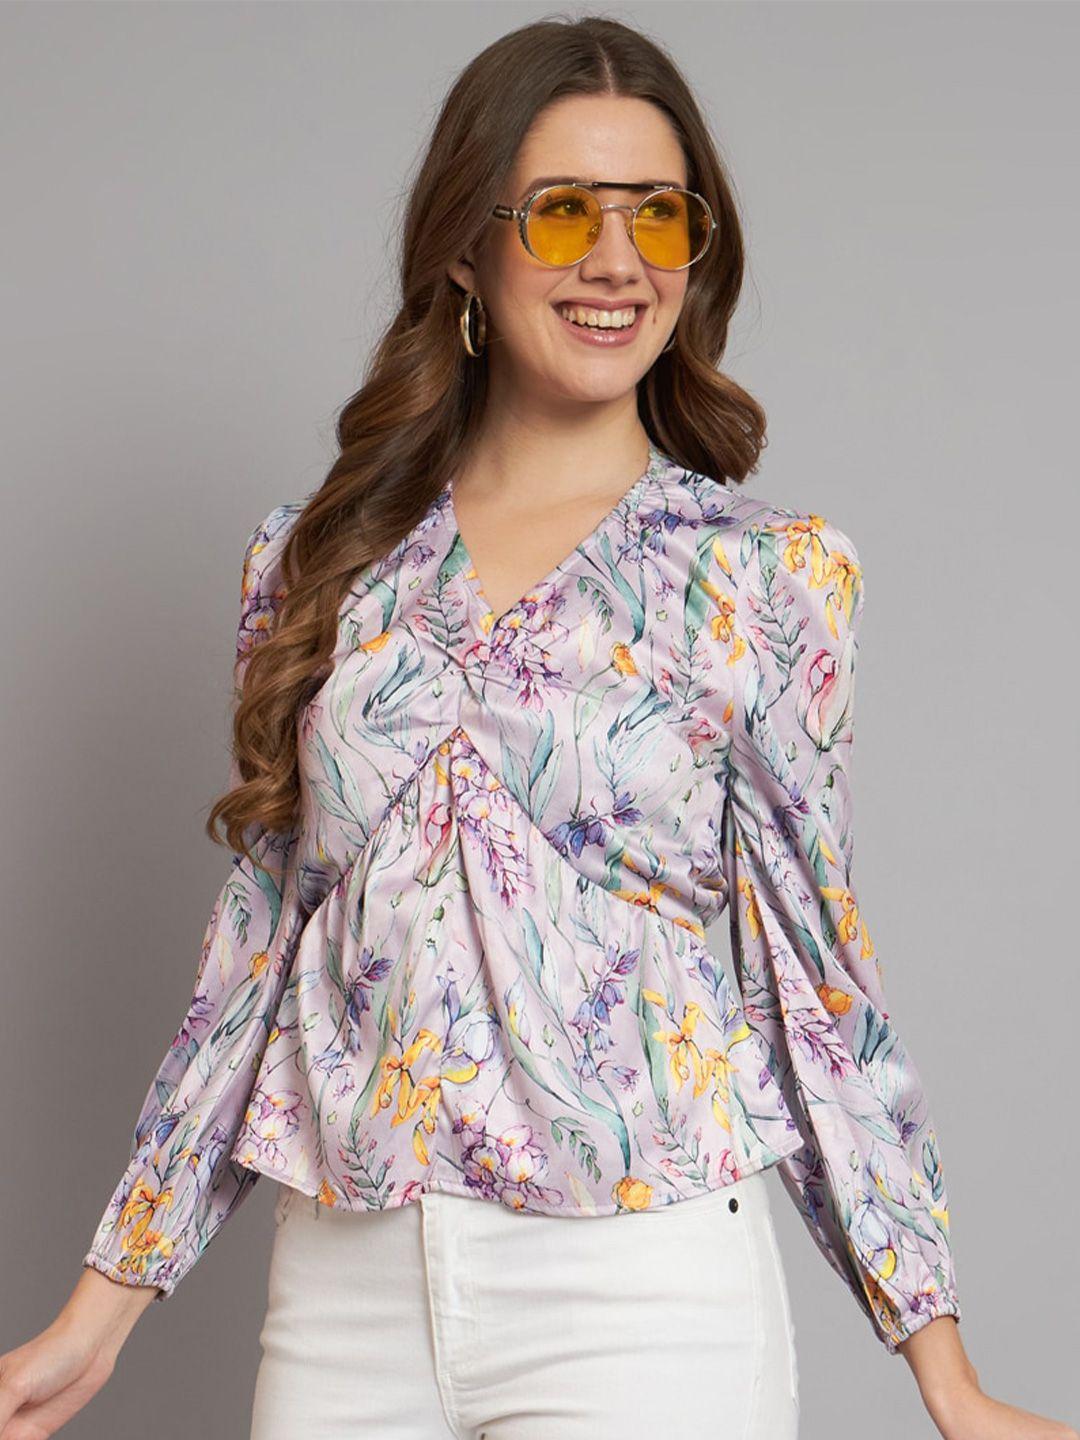 The Dry State Lavender Floral Printed Cinched Waist Top